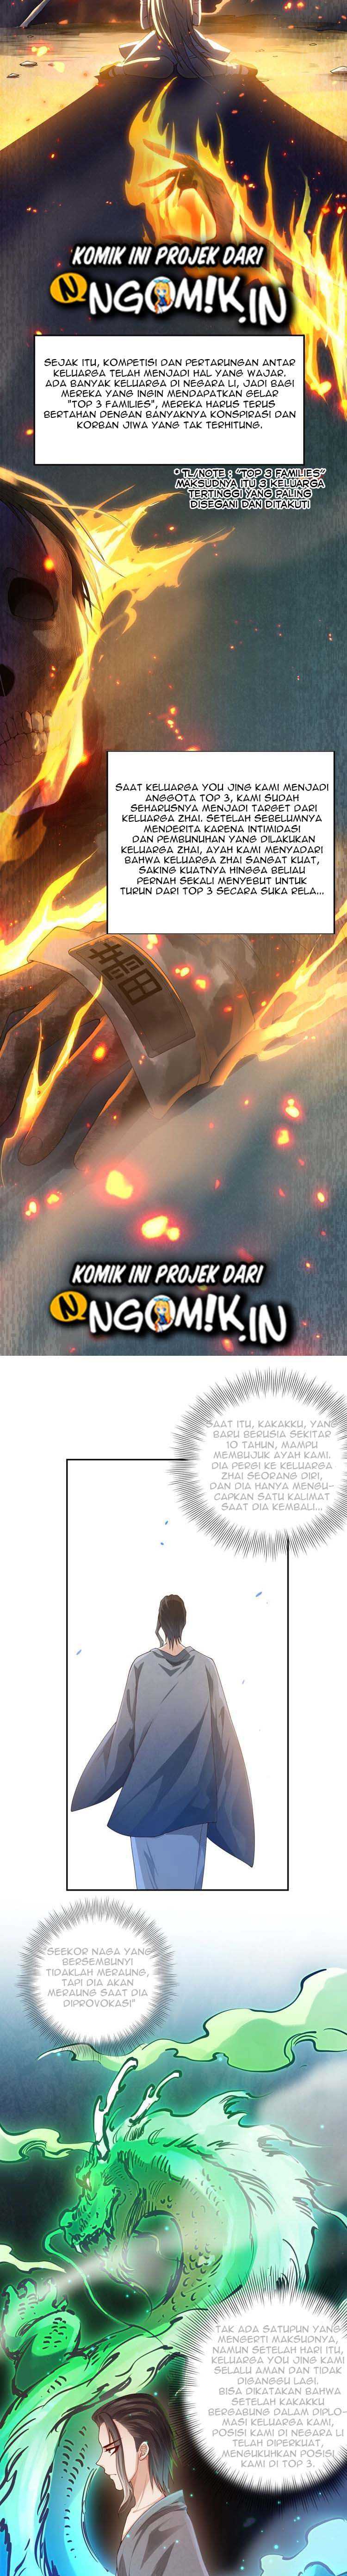 Ultimate Soldier Chapter 79